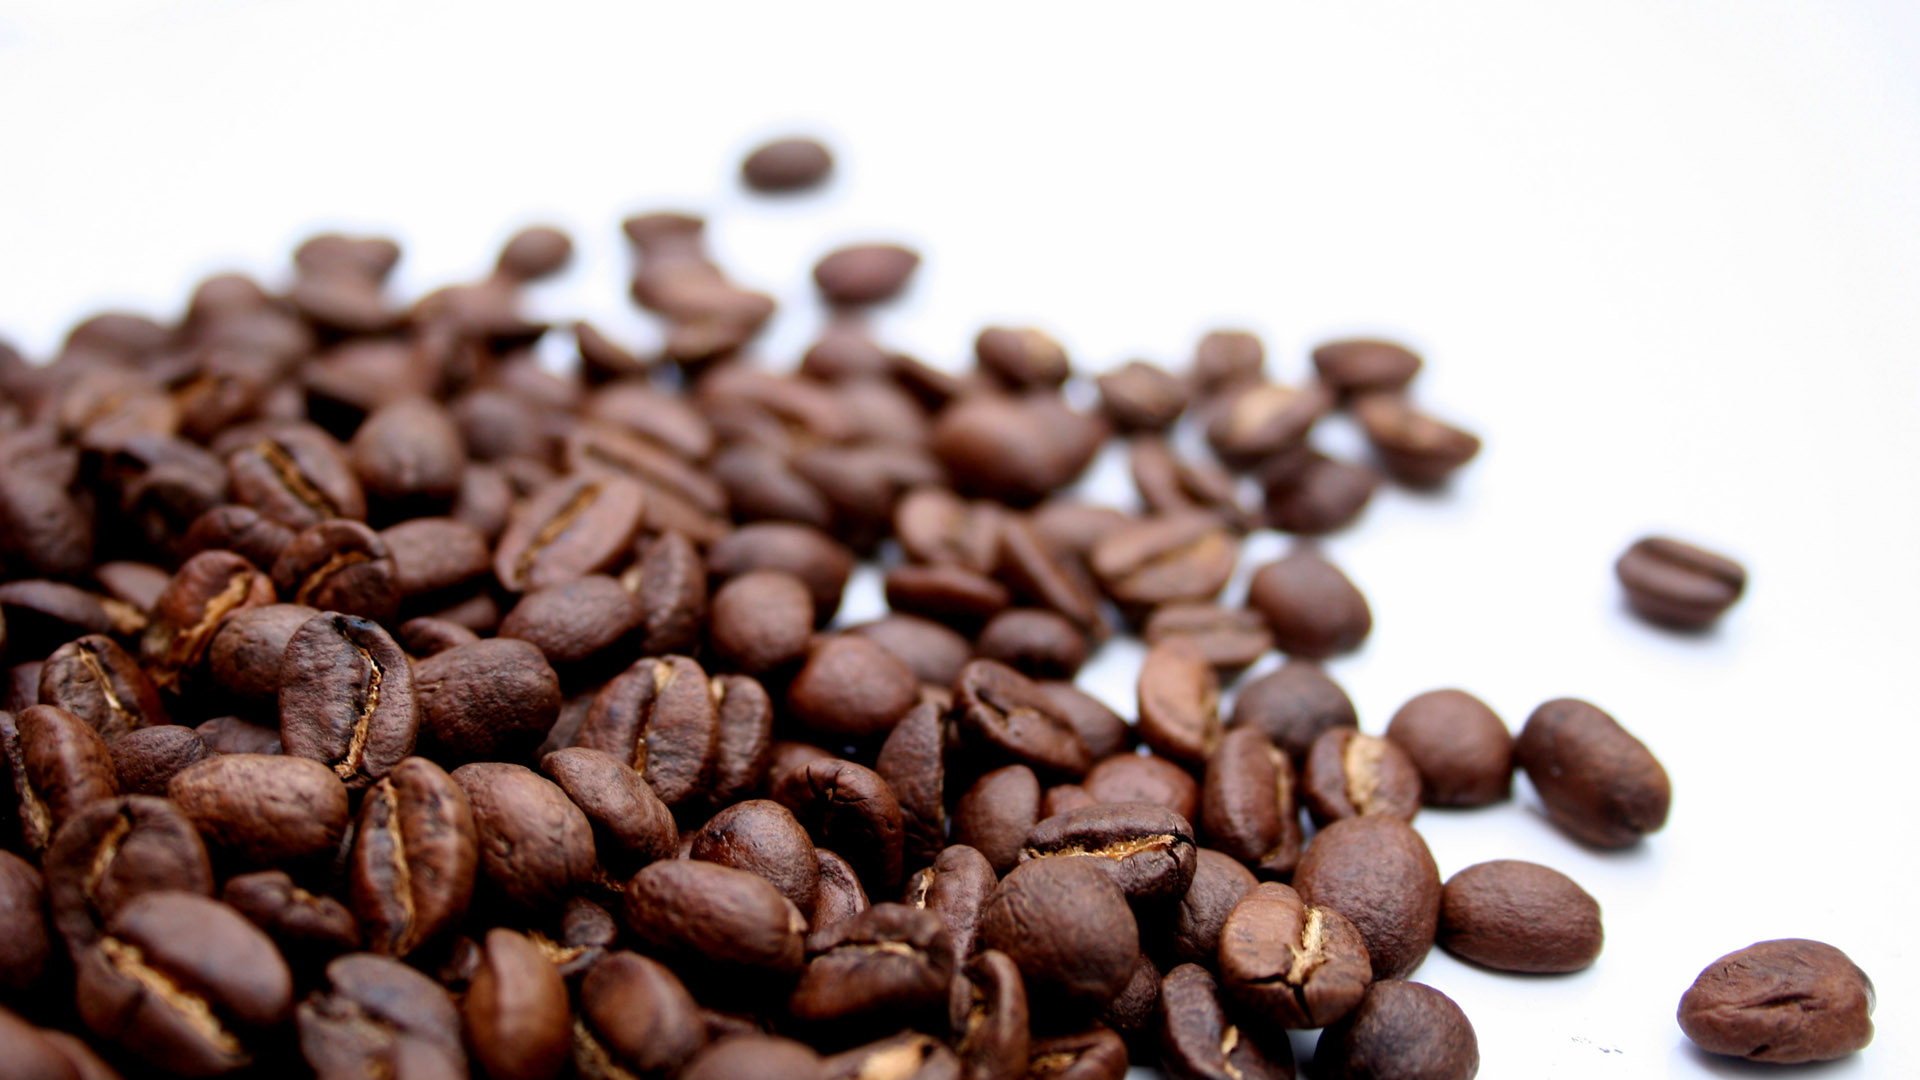 Coffee Beans 1920x1080 HD Image Photography